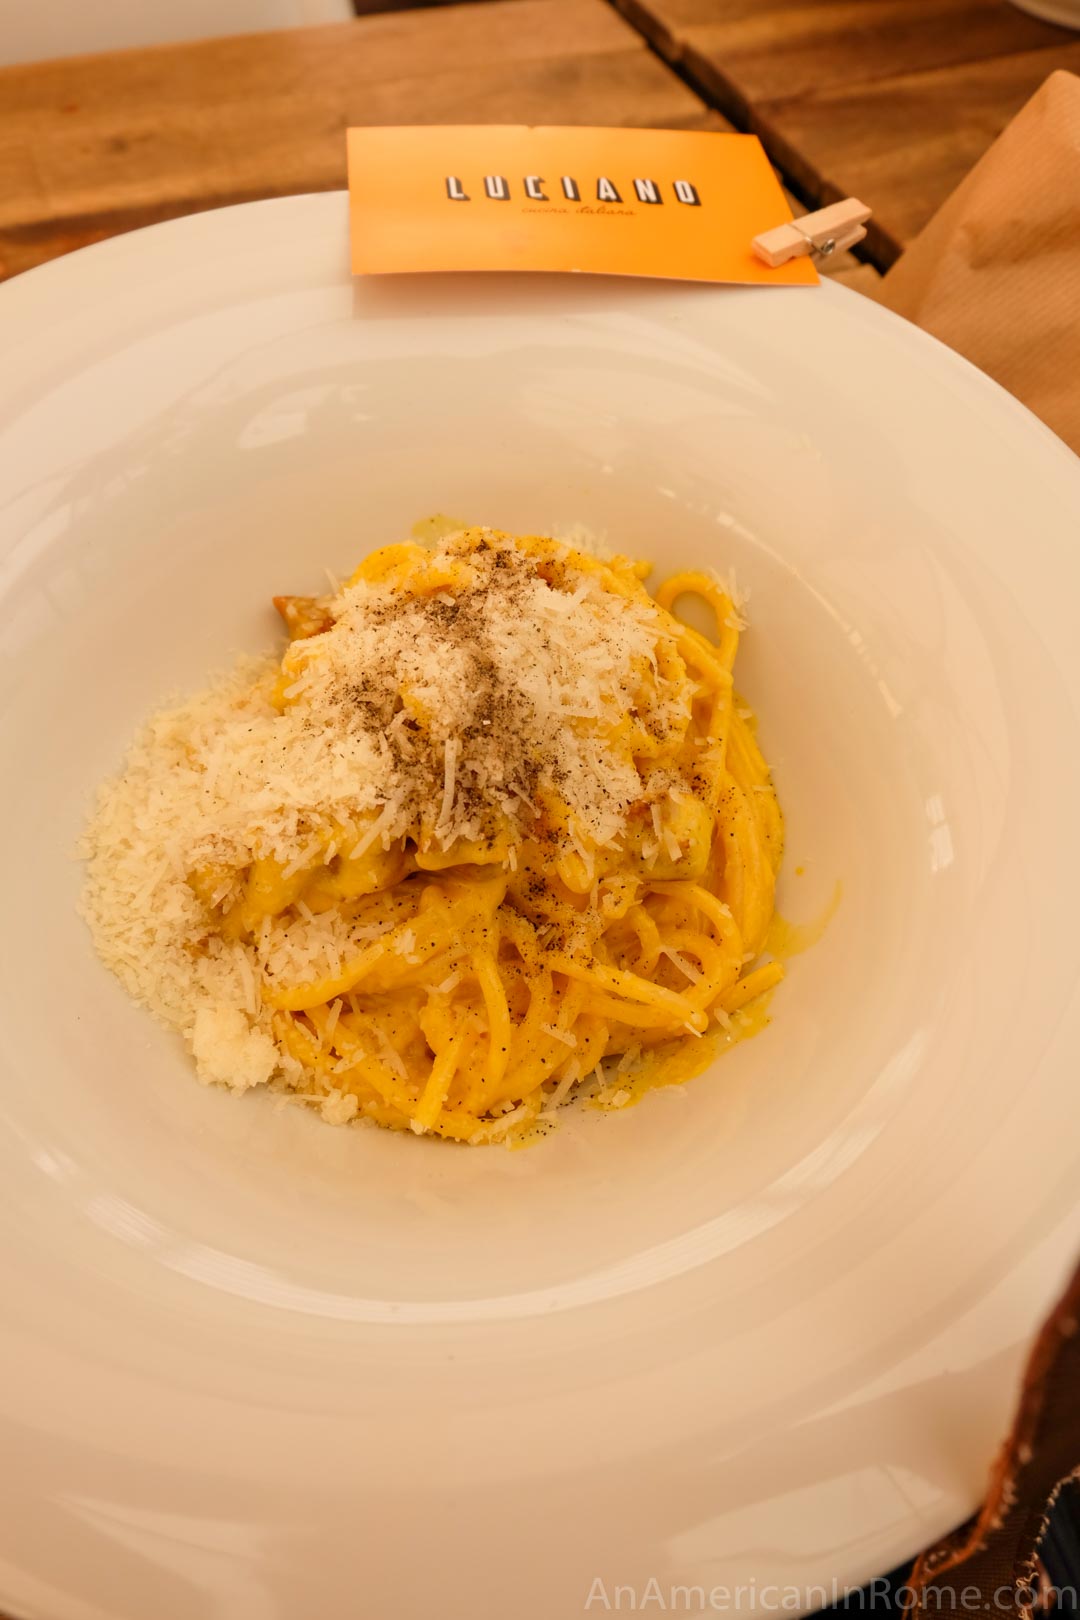 carbonara at Luciano in Rome